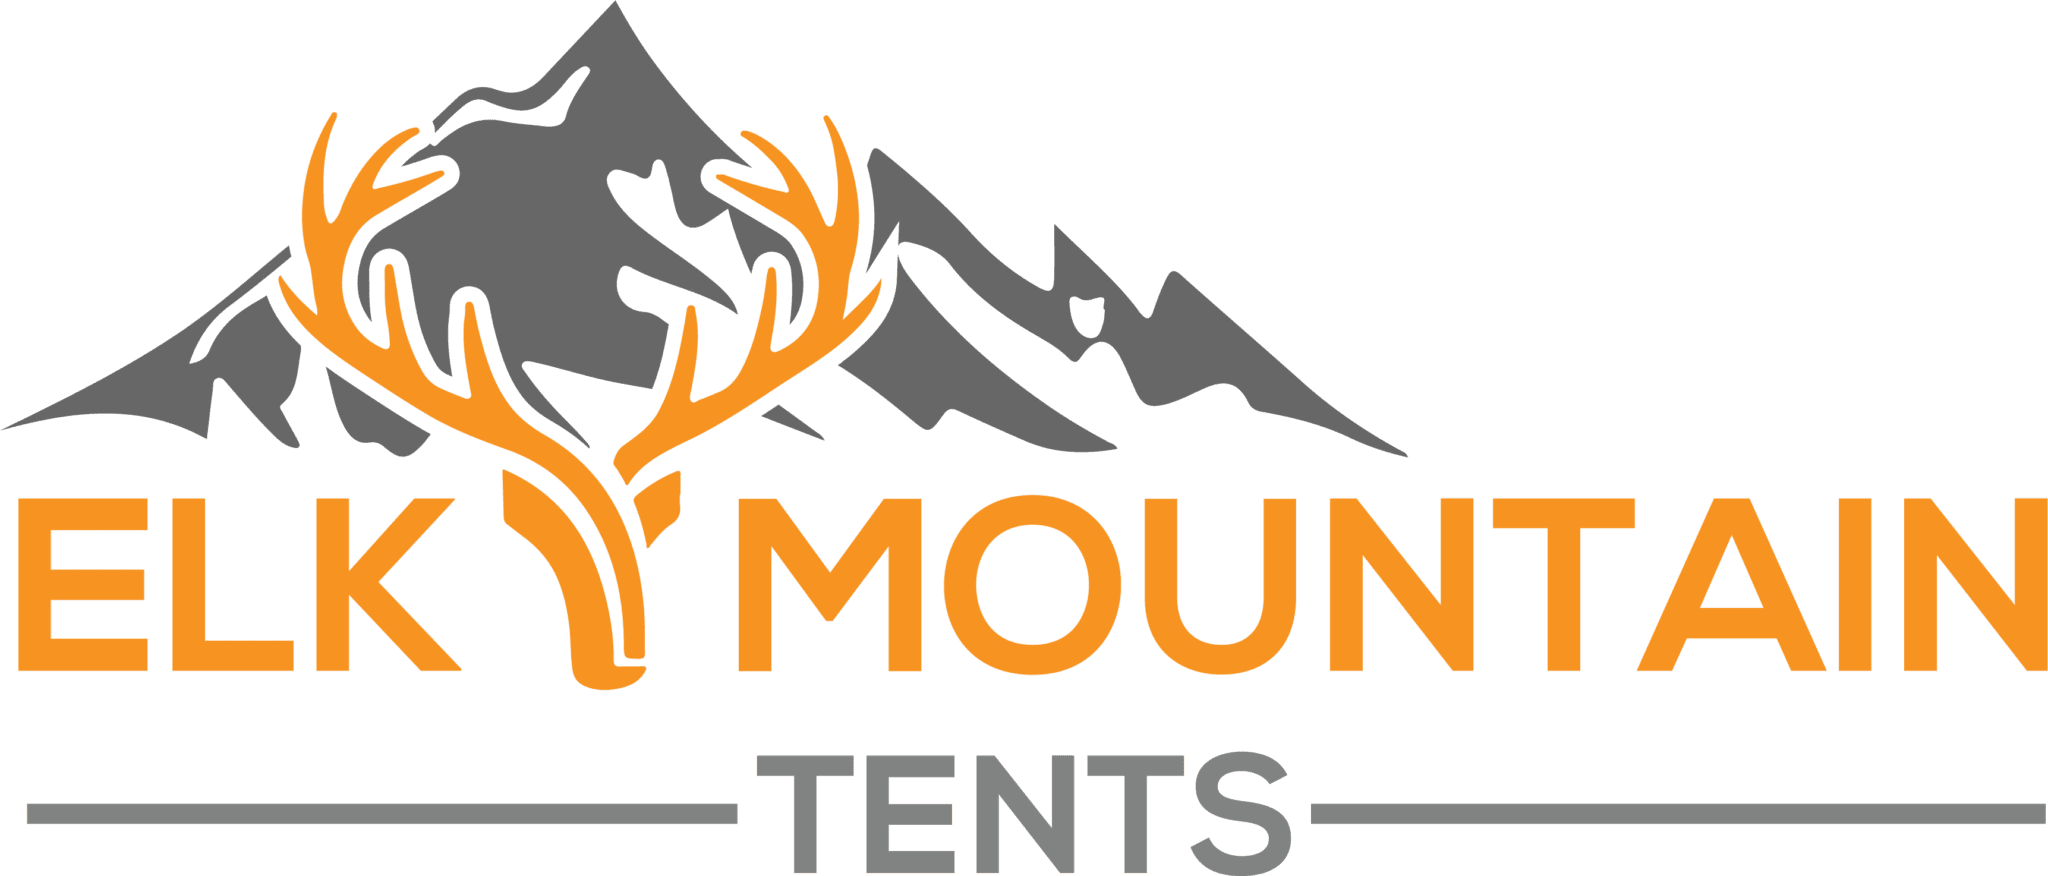 Elk Mountain Tents Coupons & Promo codes